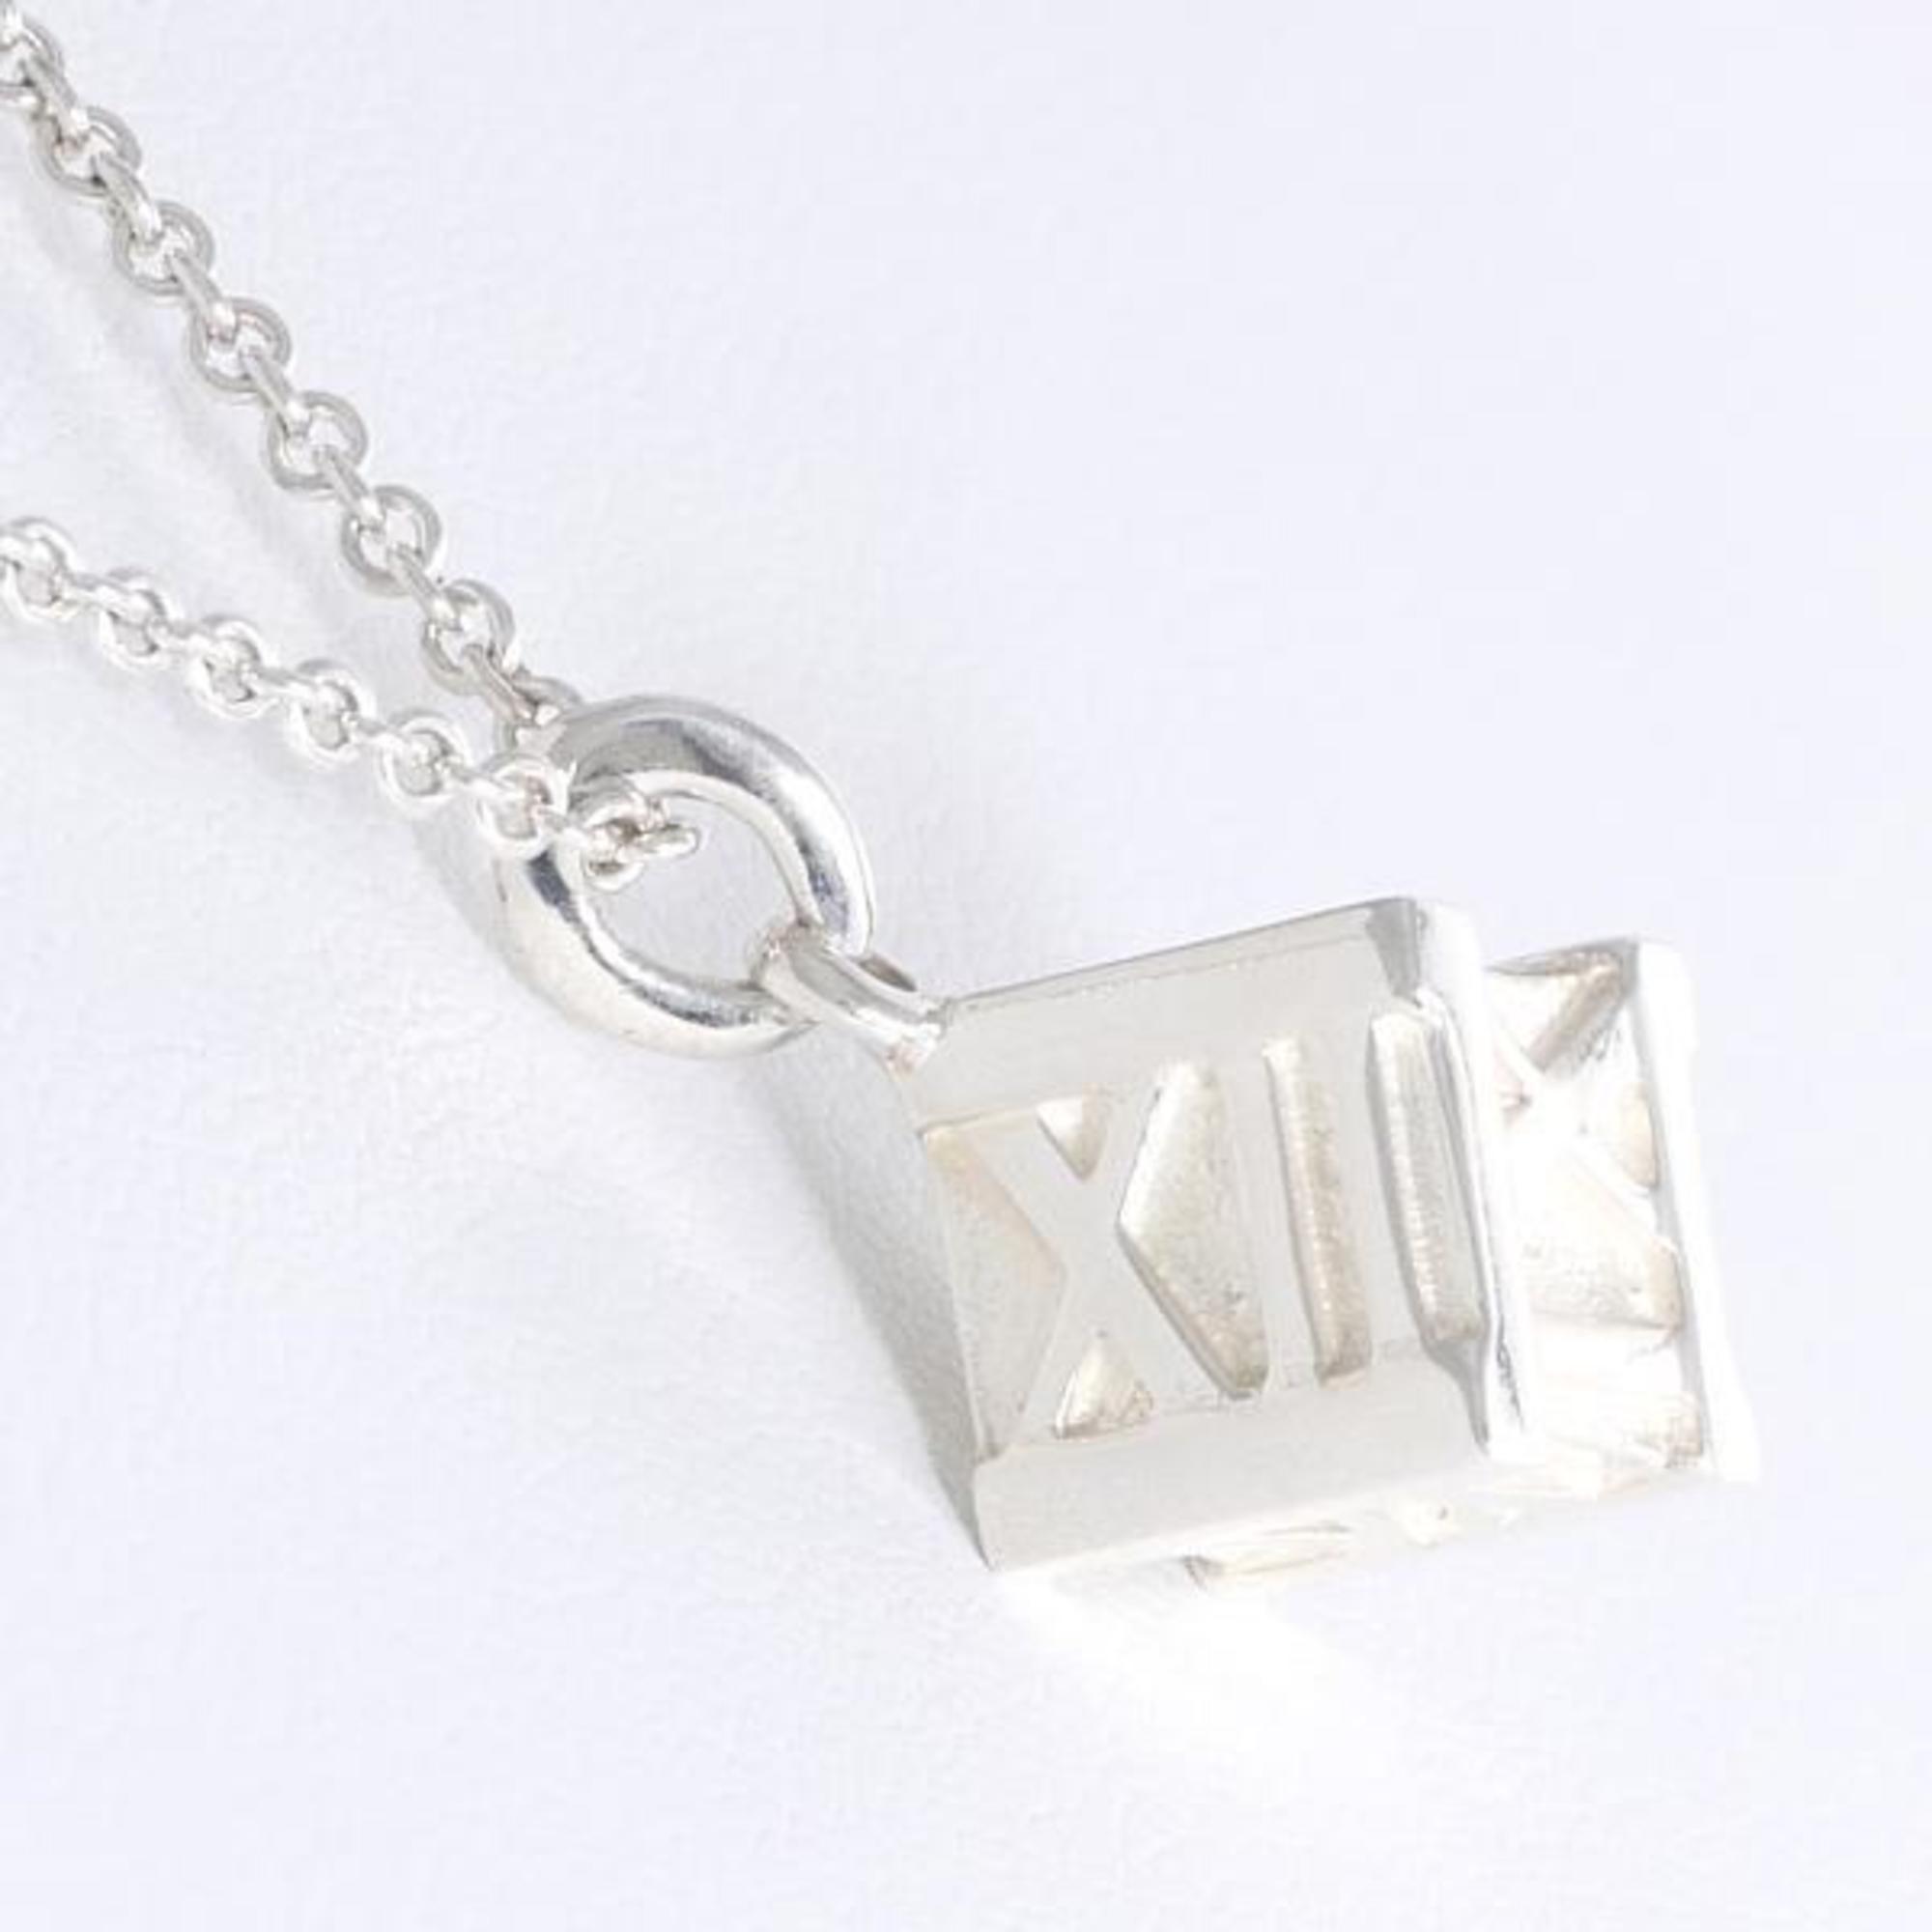 Tiffany Atlas Cube Silver Necklace Box Bag Total weight approx. 7.8g Approx. 40cm